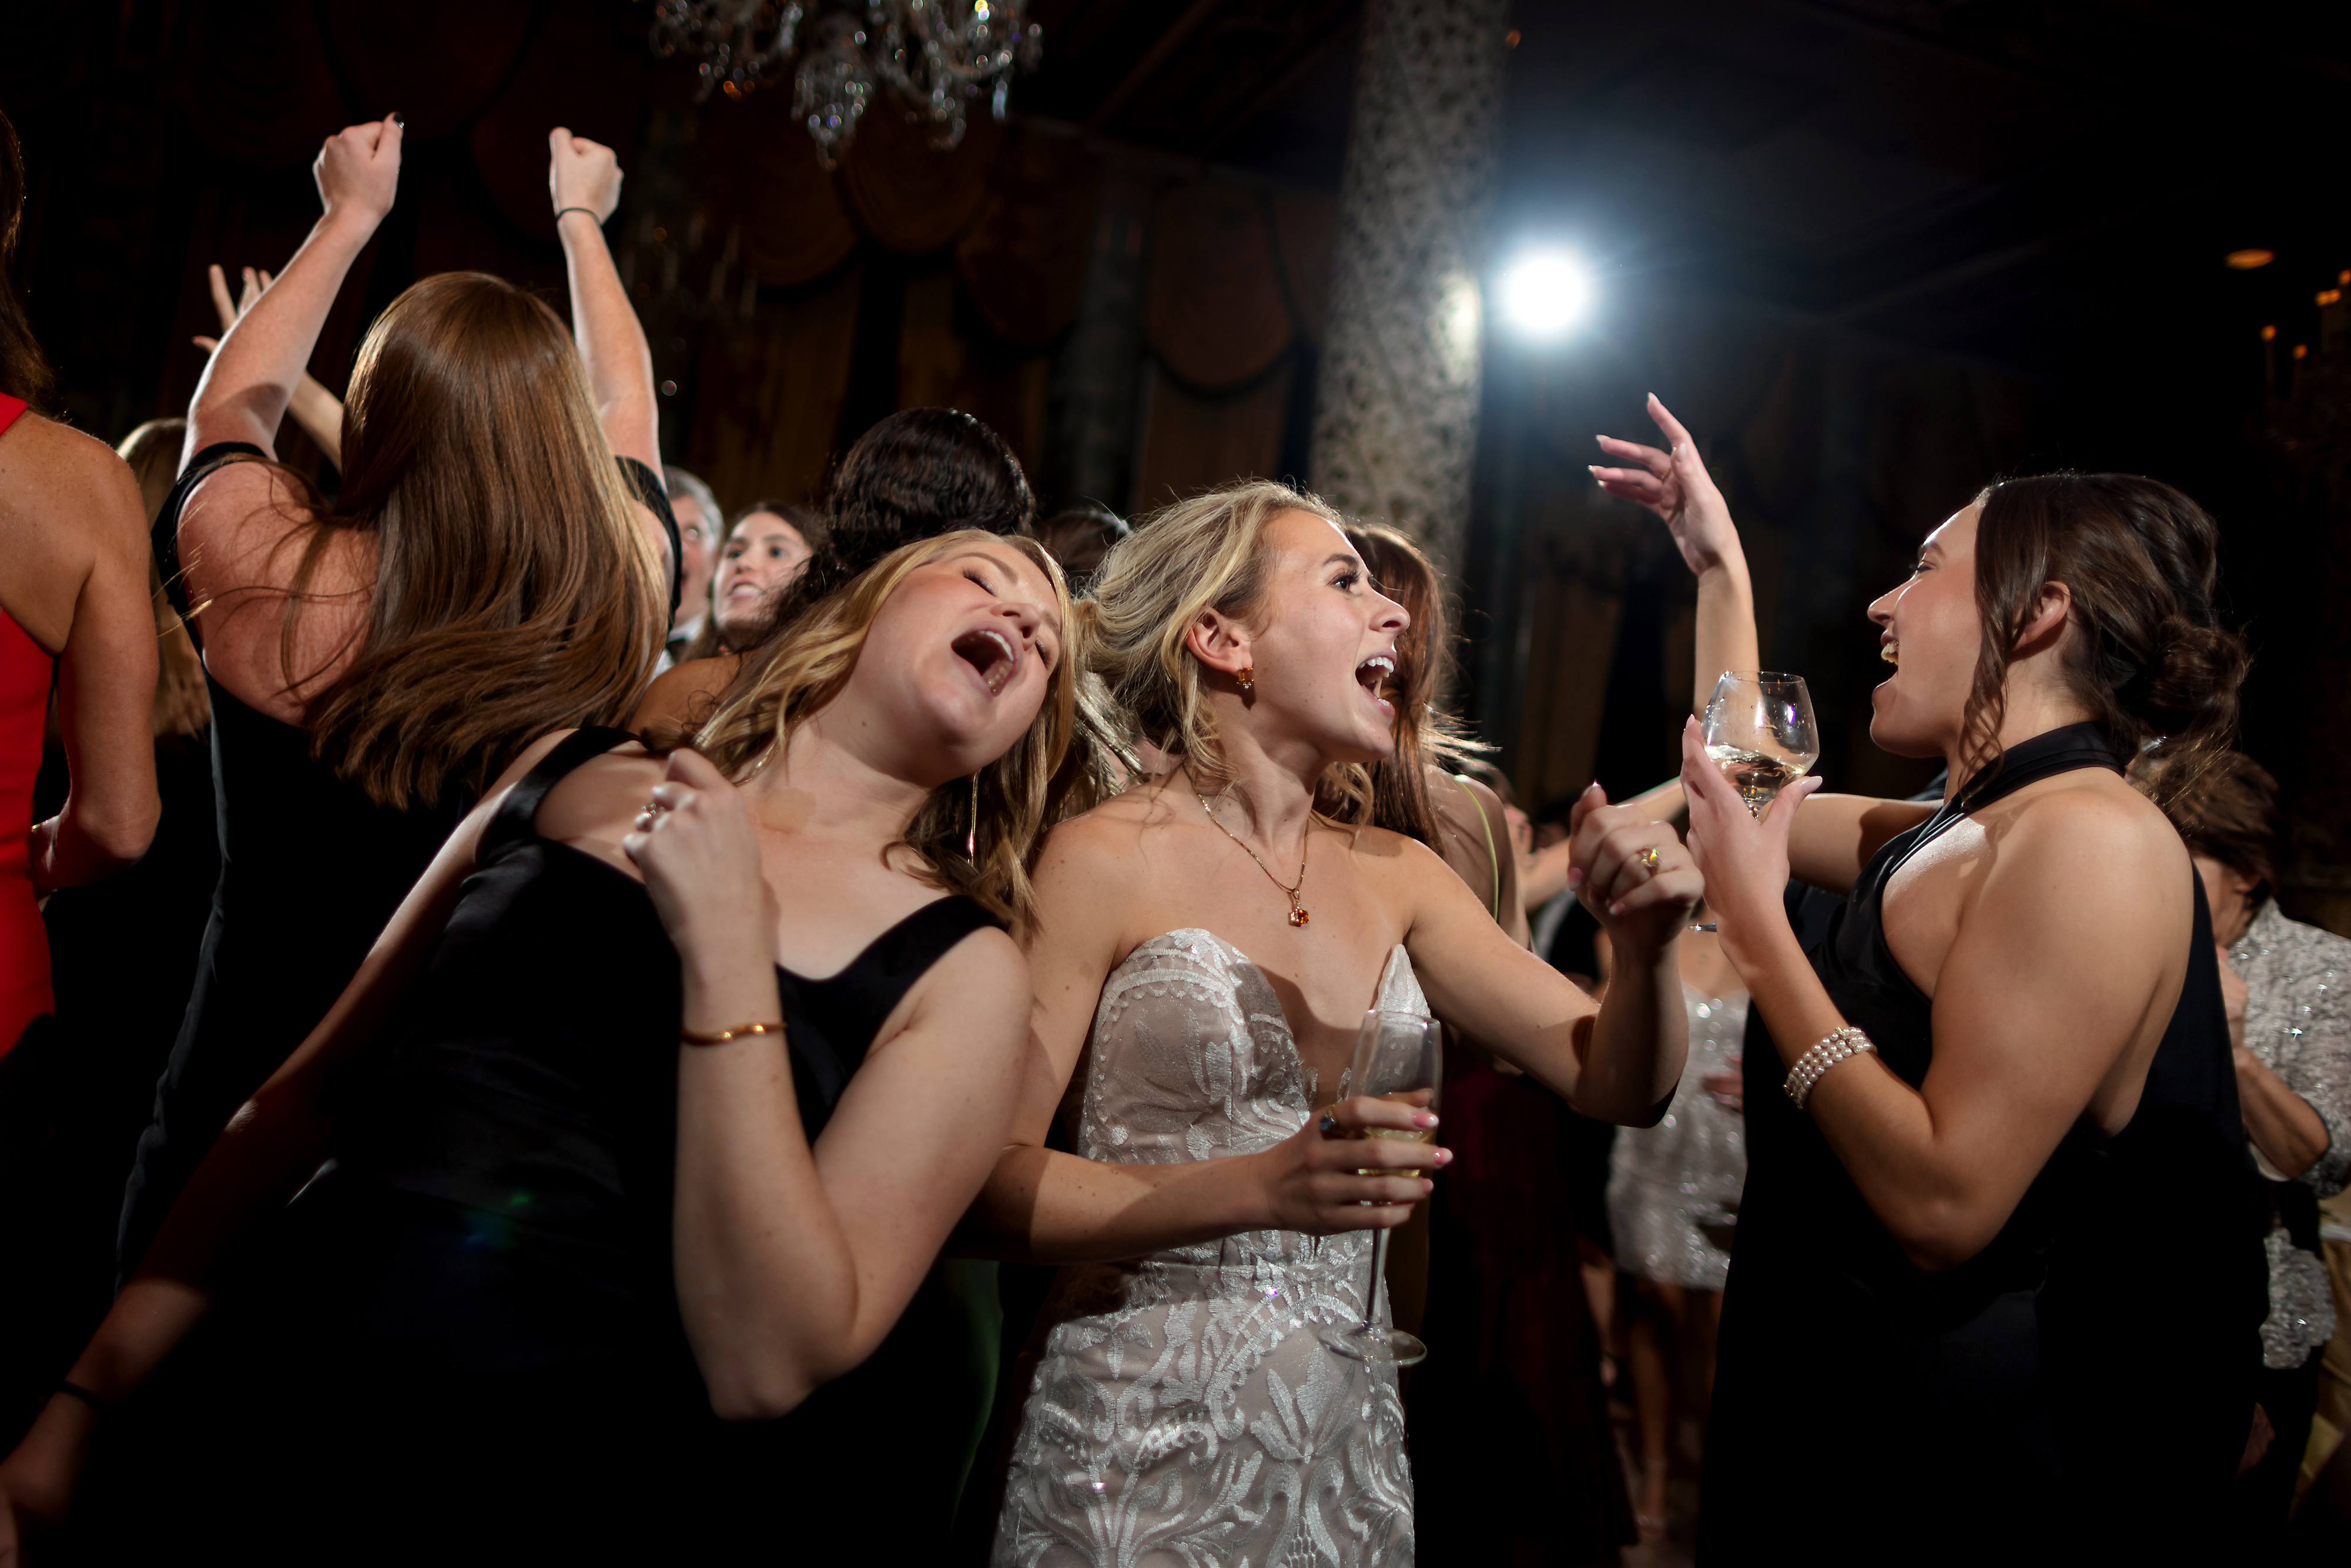 Wedding guests dance during wedding reception in the Grand Ballroom at The Drake Hotel in Chicago